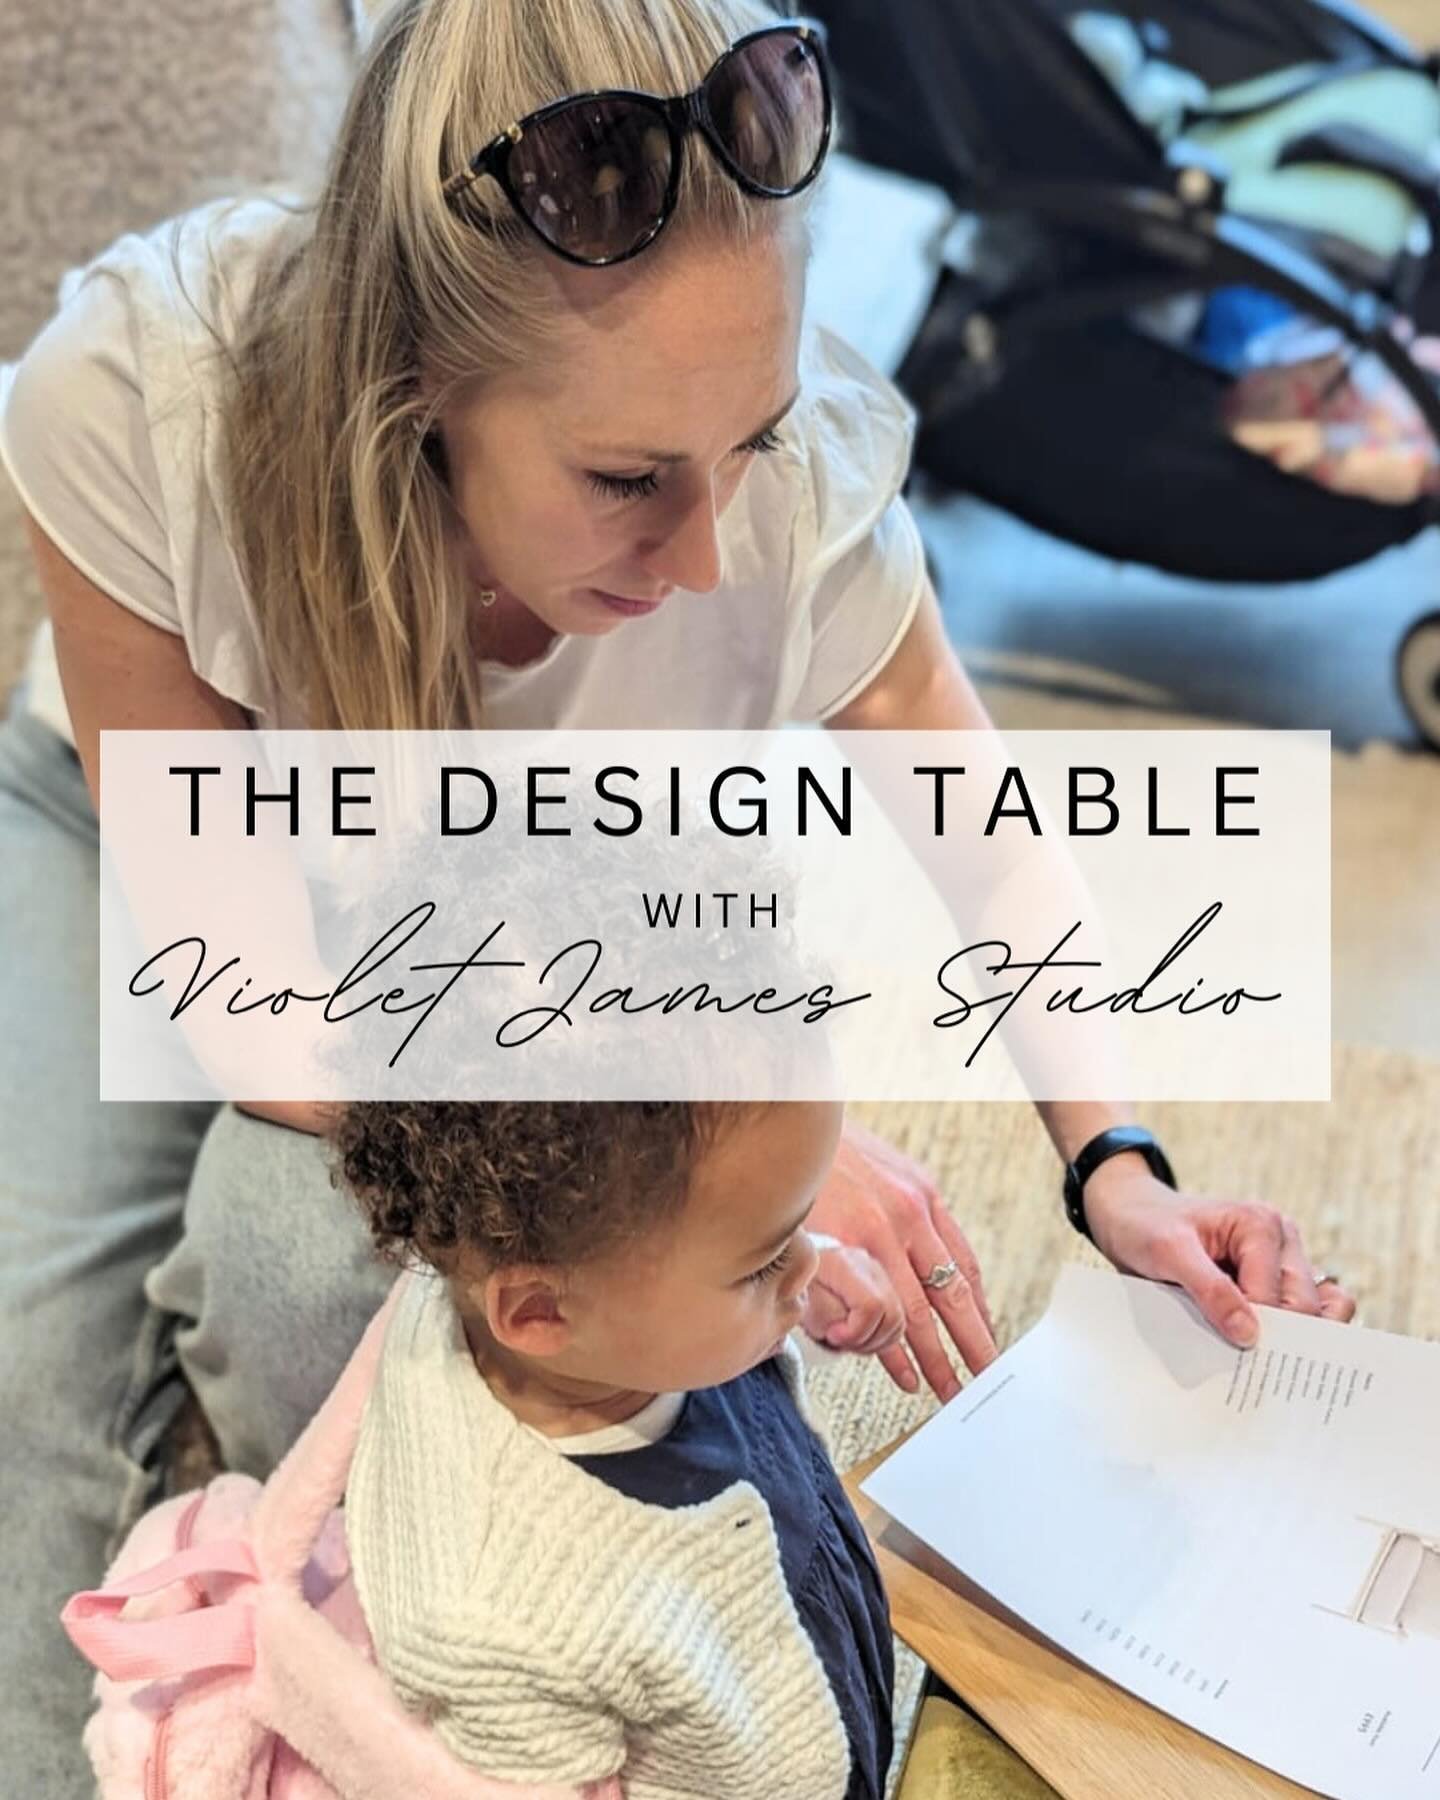 I&rsquo;m beyond excited to launch our new interior design event series.

My vision is to create a light-hearted, parent-focussed baby class, think 𝘭𝘶𝘯𝘤𝘩 𝘢𝘯𝘥 𝘭𝘦𝘢𝘳𝘯 + 𝘣𝘢𝘣𝘺, where you can chat with fellow design-lovers and leave feelin